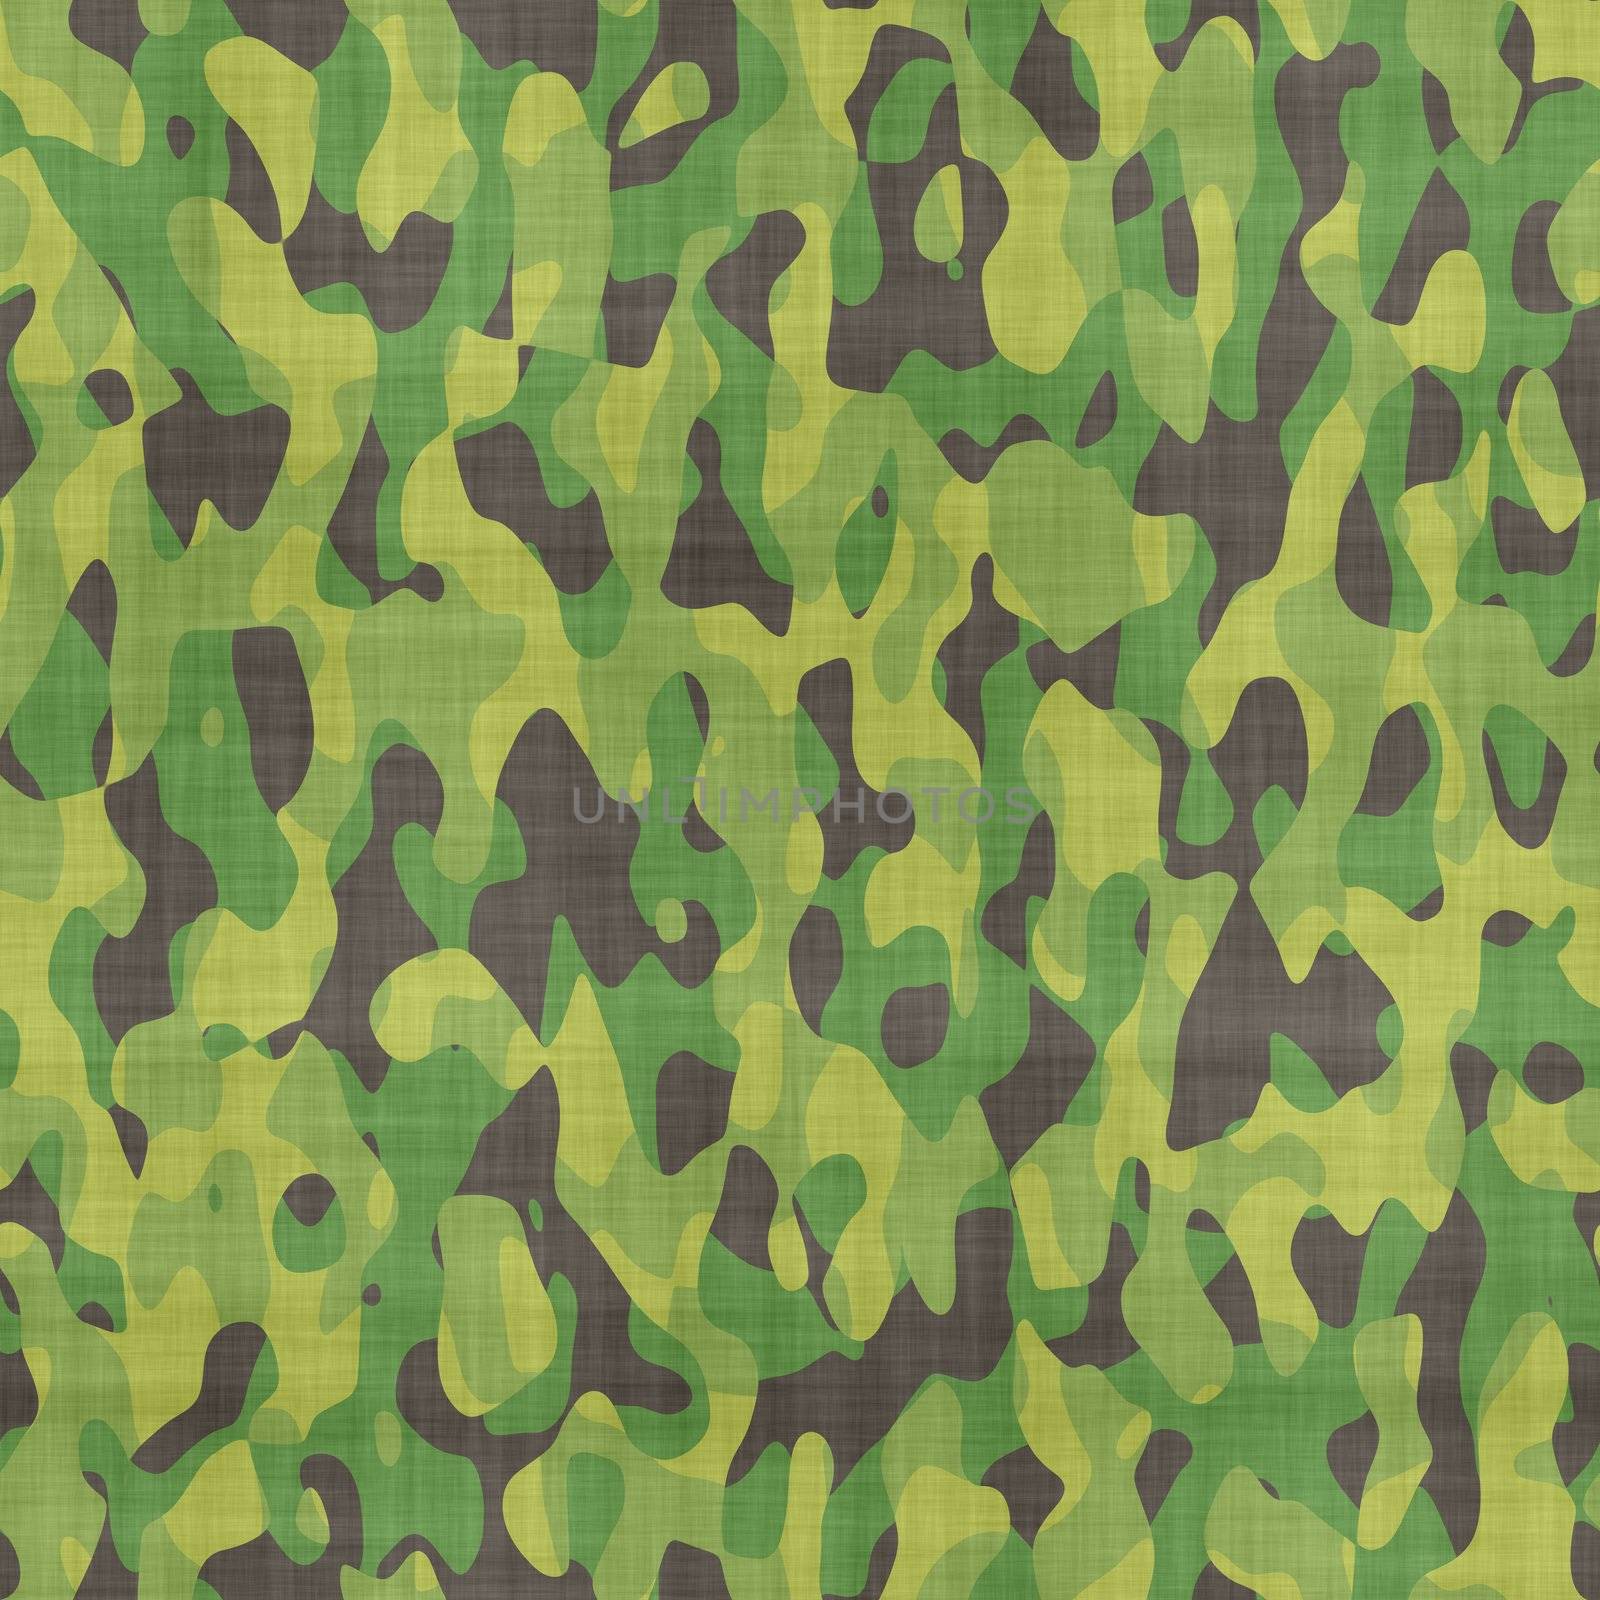 camouflage material by clearviewstock